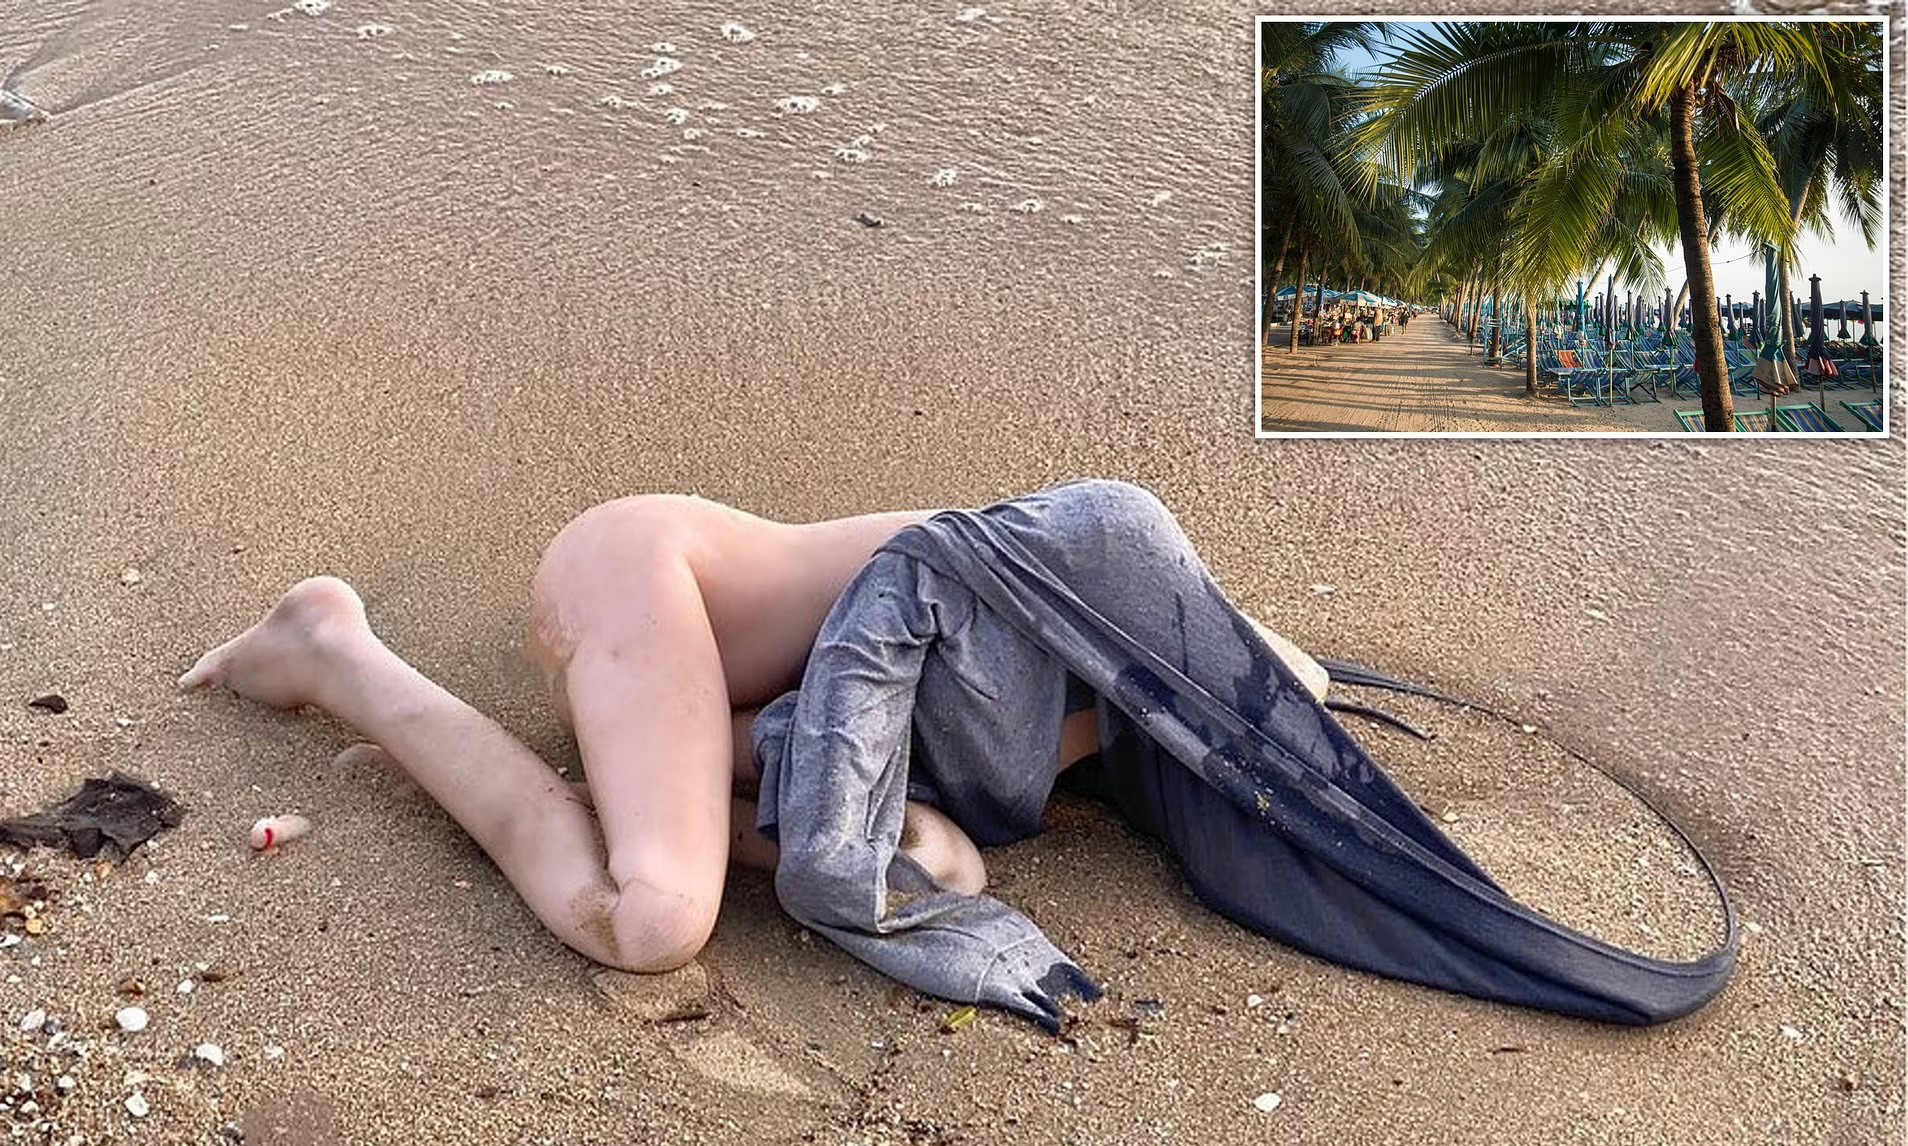 Dead Body Found On Beach Turns Out To Be Sex Doll